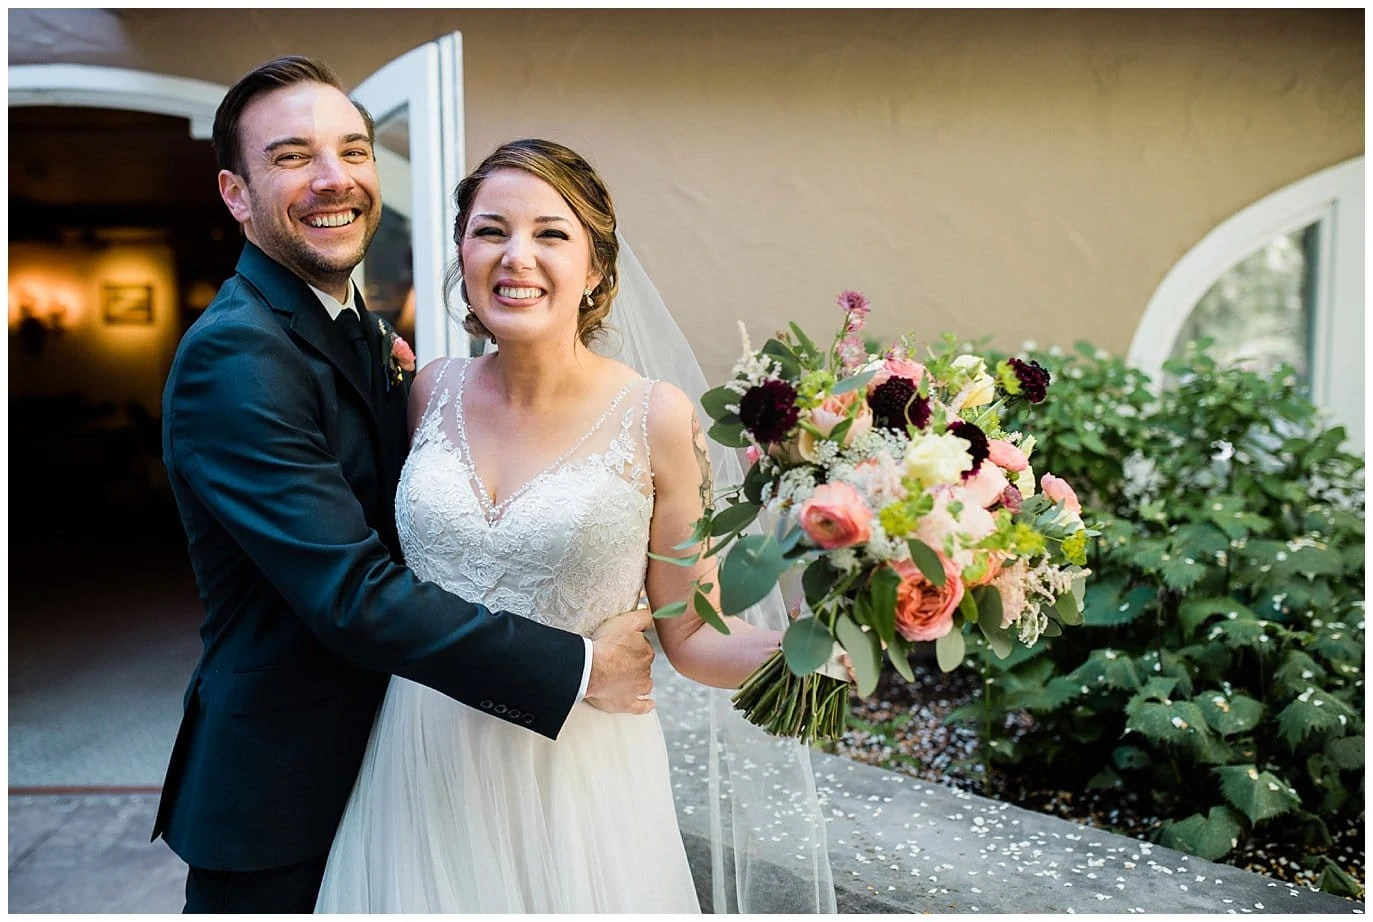 bride and grooom celebrate after vail wedding ceremony at Sonnenalp Hotel Vail Colorado Wedding by RMNP Wedding Photographer Jennie Crate